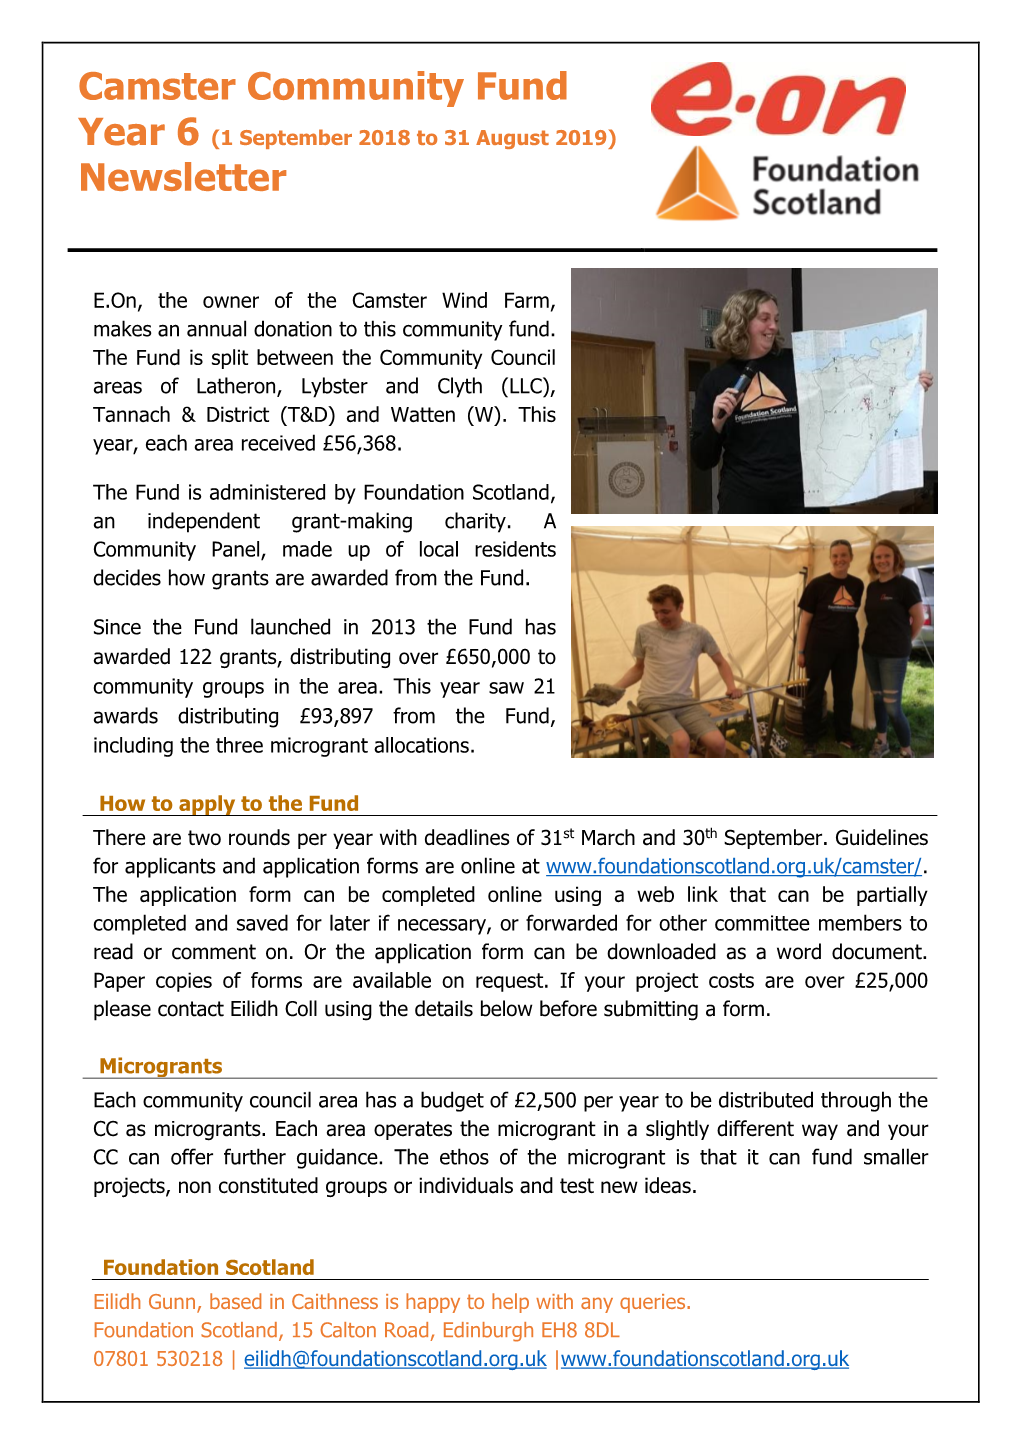 Camster Community Fund Newsletter